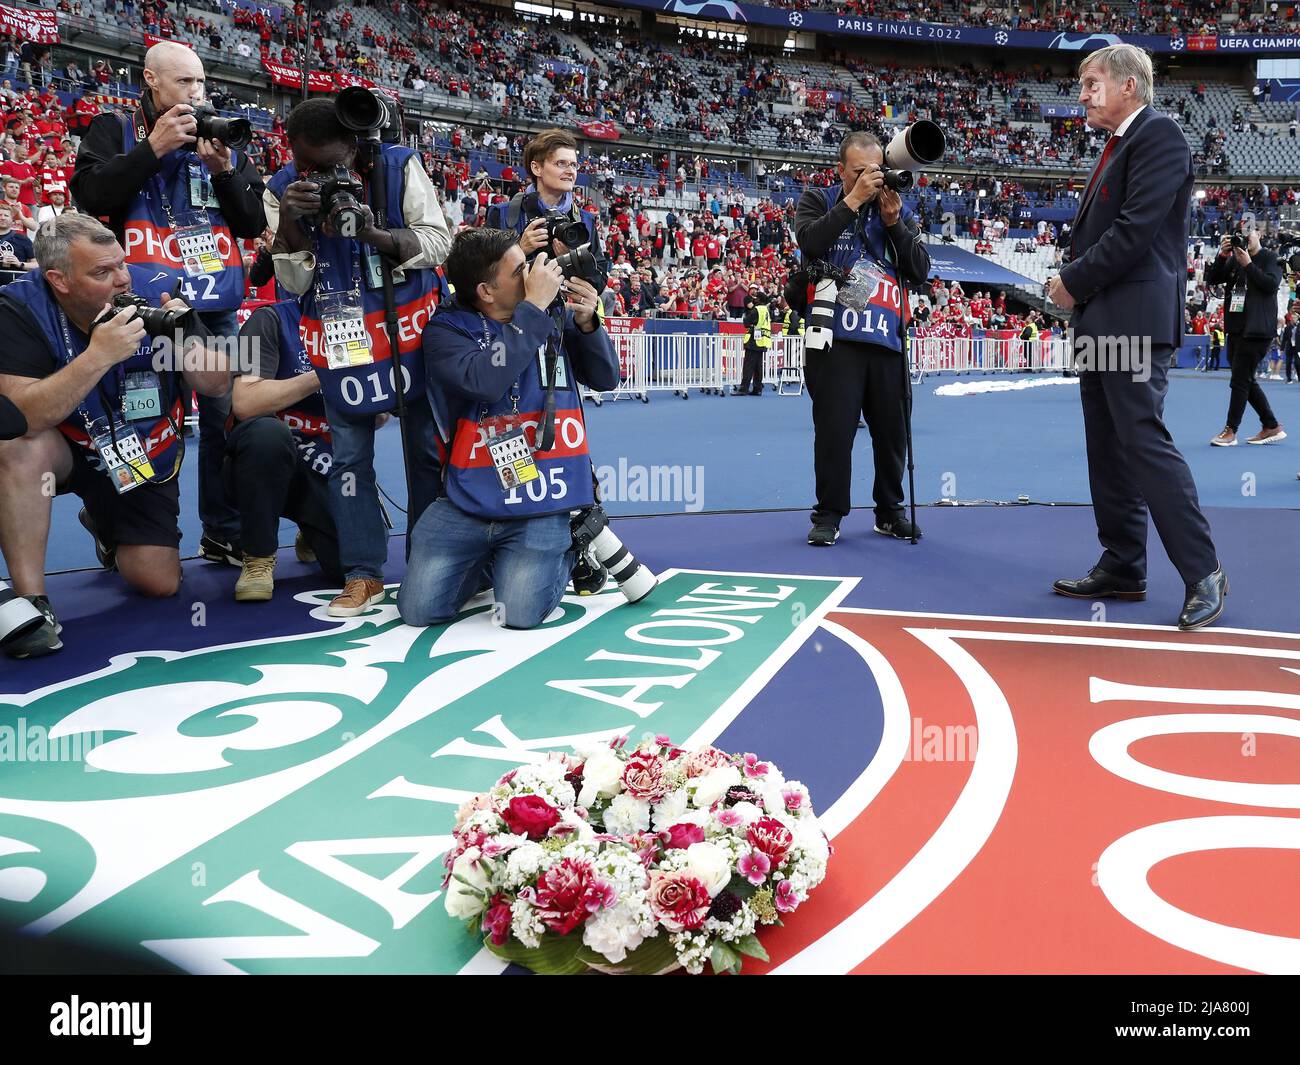 Paris, France. 28th May, 2022. PARIS - Kenny Dalglish lay a commerative wreath for the Heysel disaster during the UEFA Champions League final match between Liverpool FC and Real Madrid at Stade de Franc on May 28, 2022 in Paris, France. ANP | DUTCH HEIGHT | MAURICE VAN STONE Credit: ANP/Alamy Live News Stock Photo